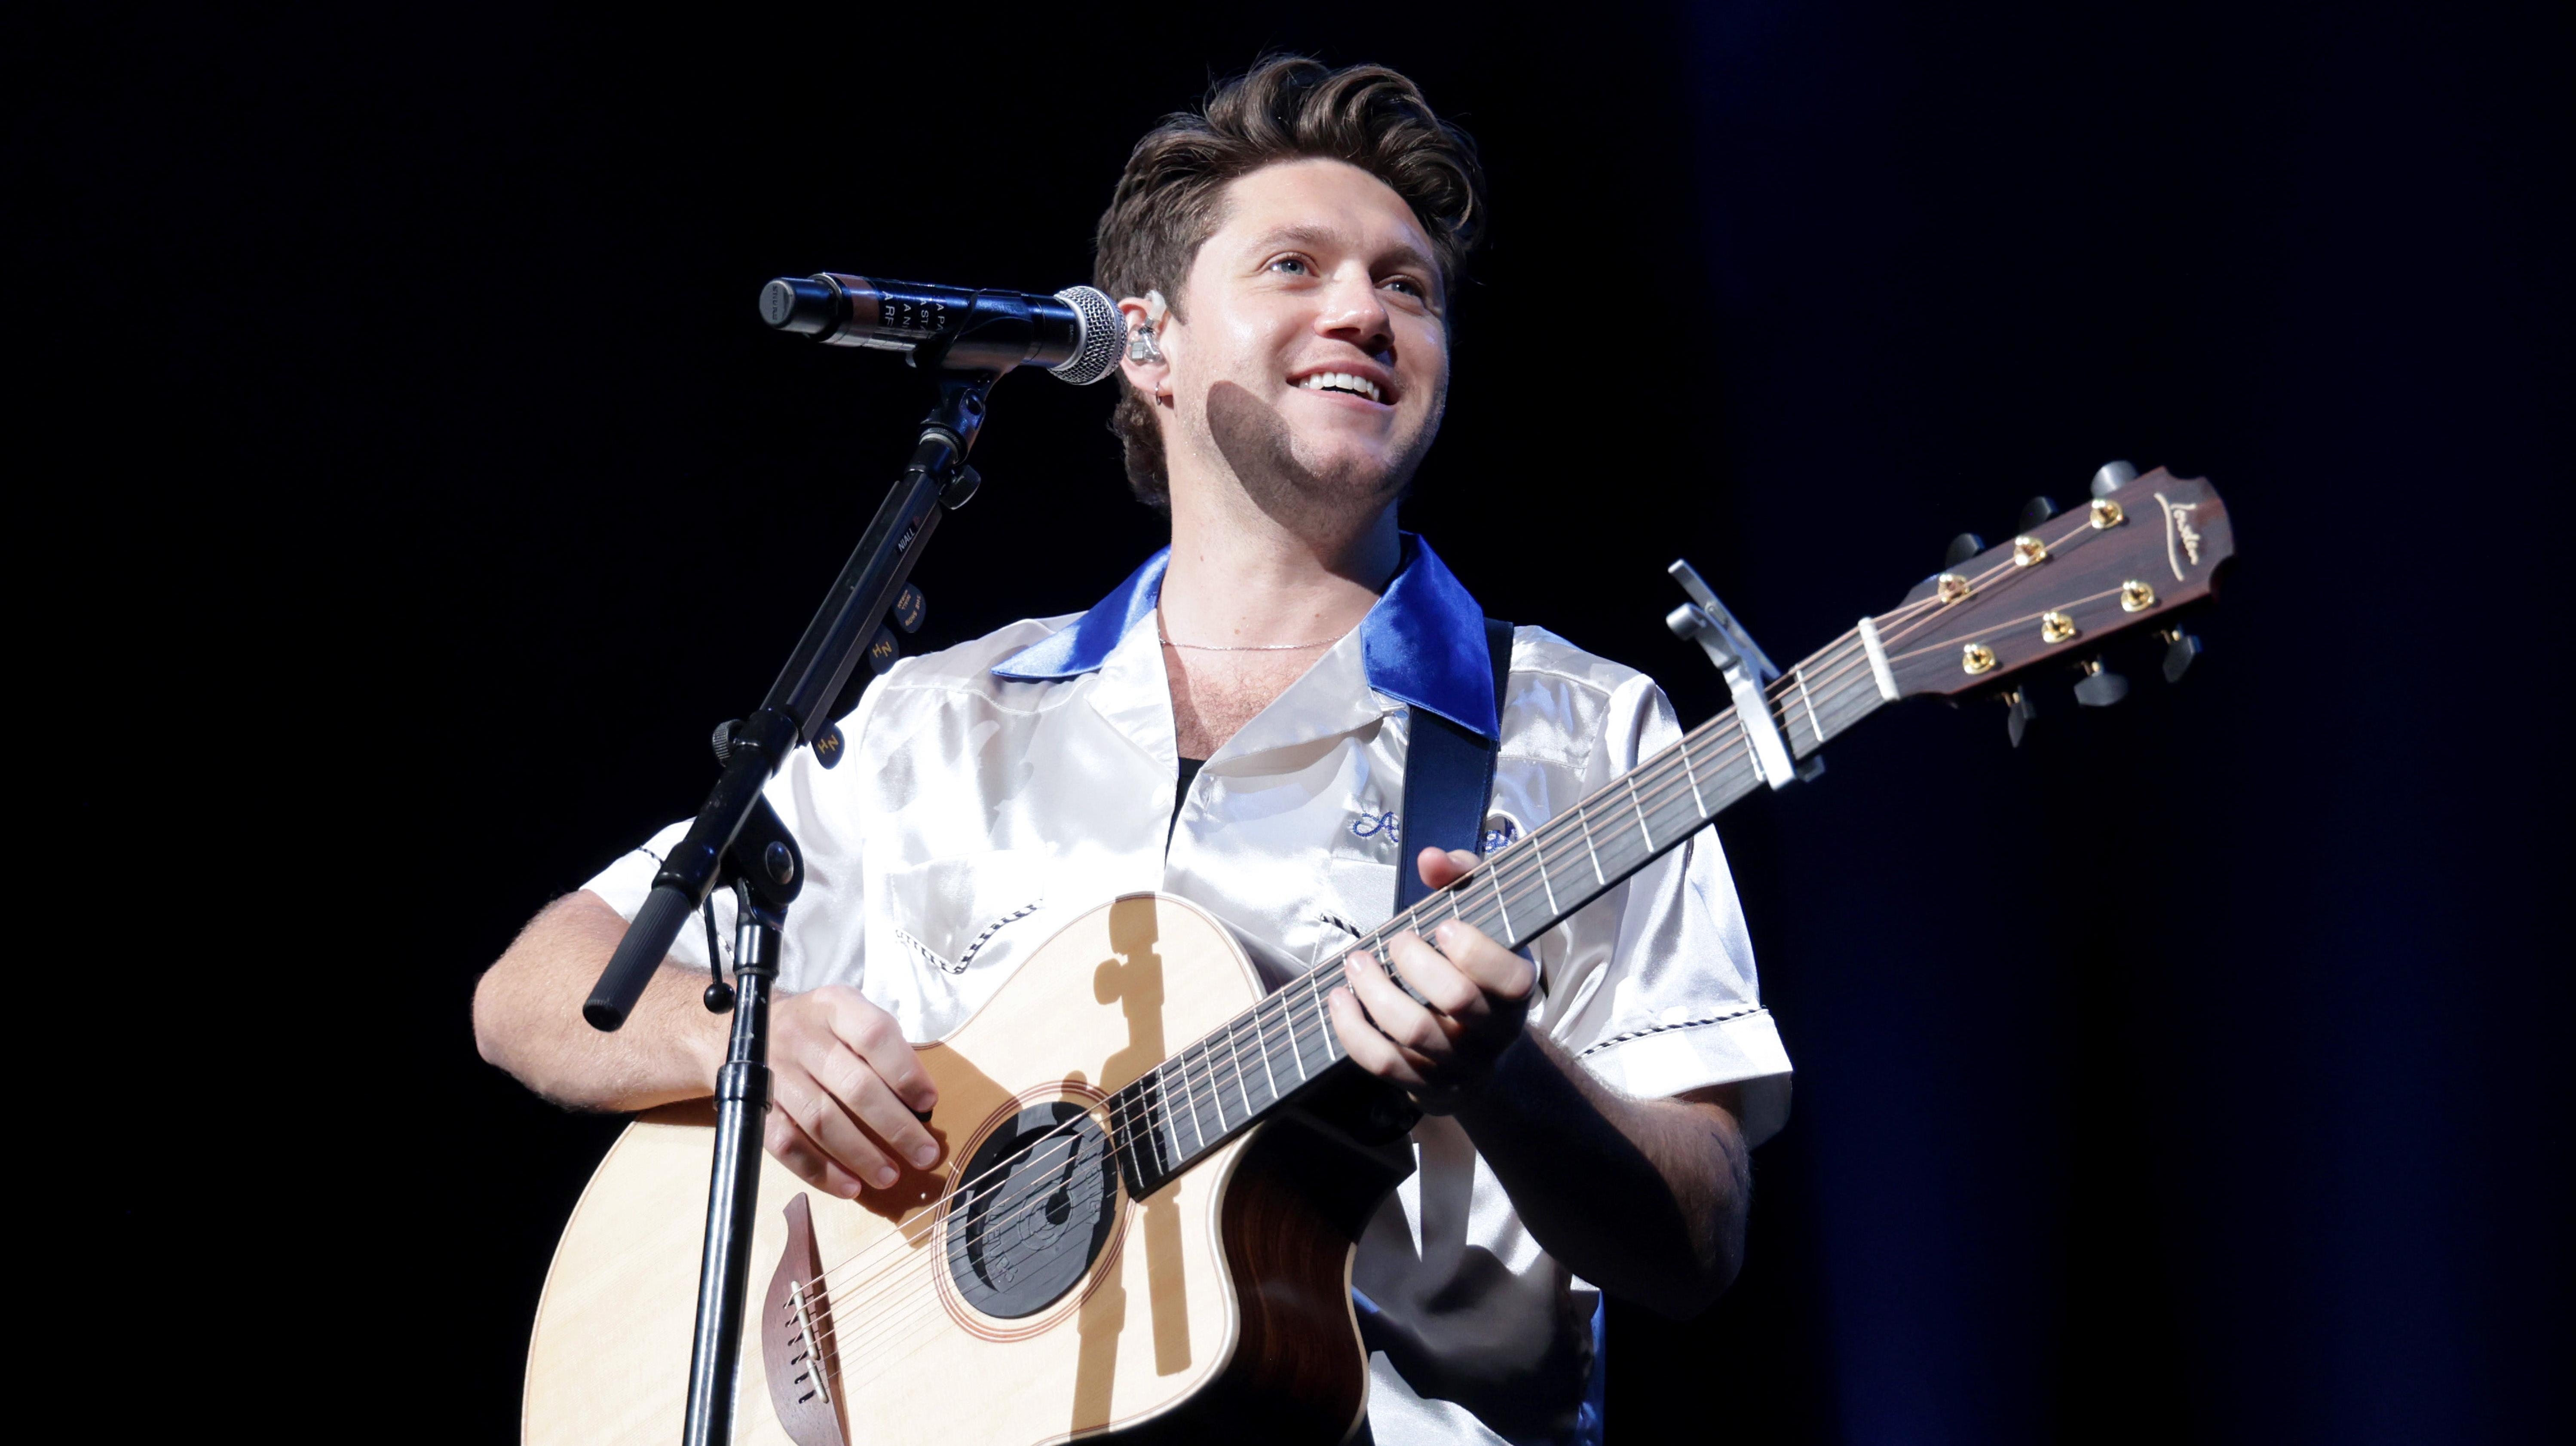 Niall Horan weeps with joy returning to Madison Square Garden for The Show